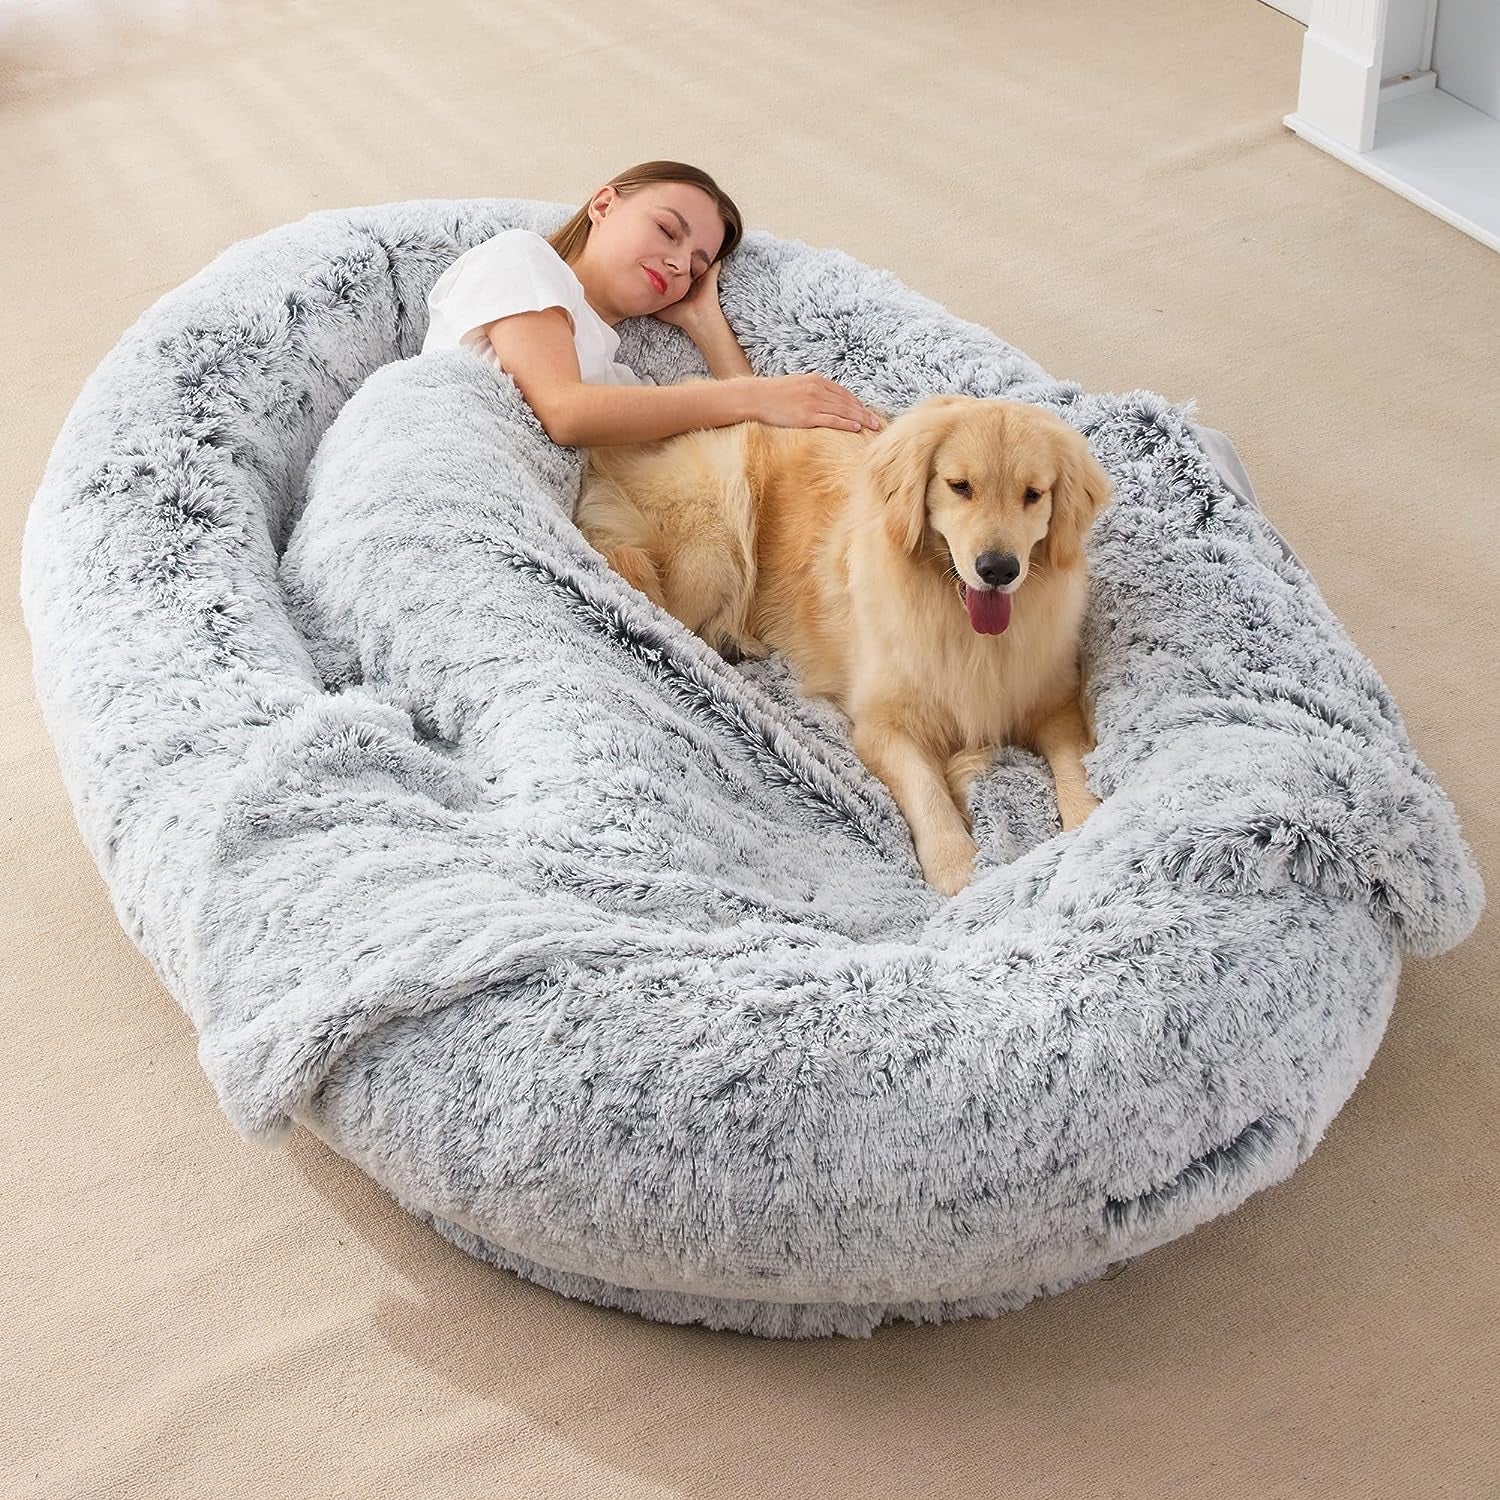 Human Sized Pet Bed